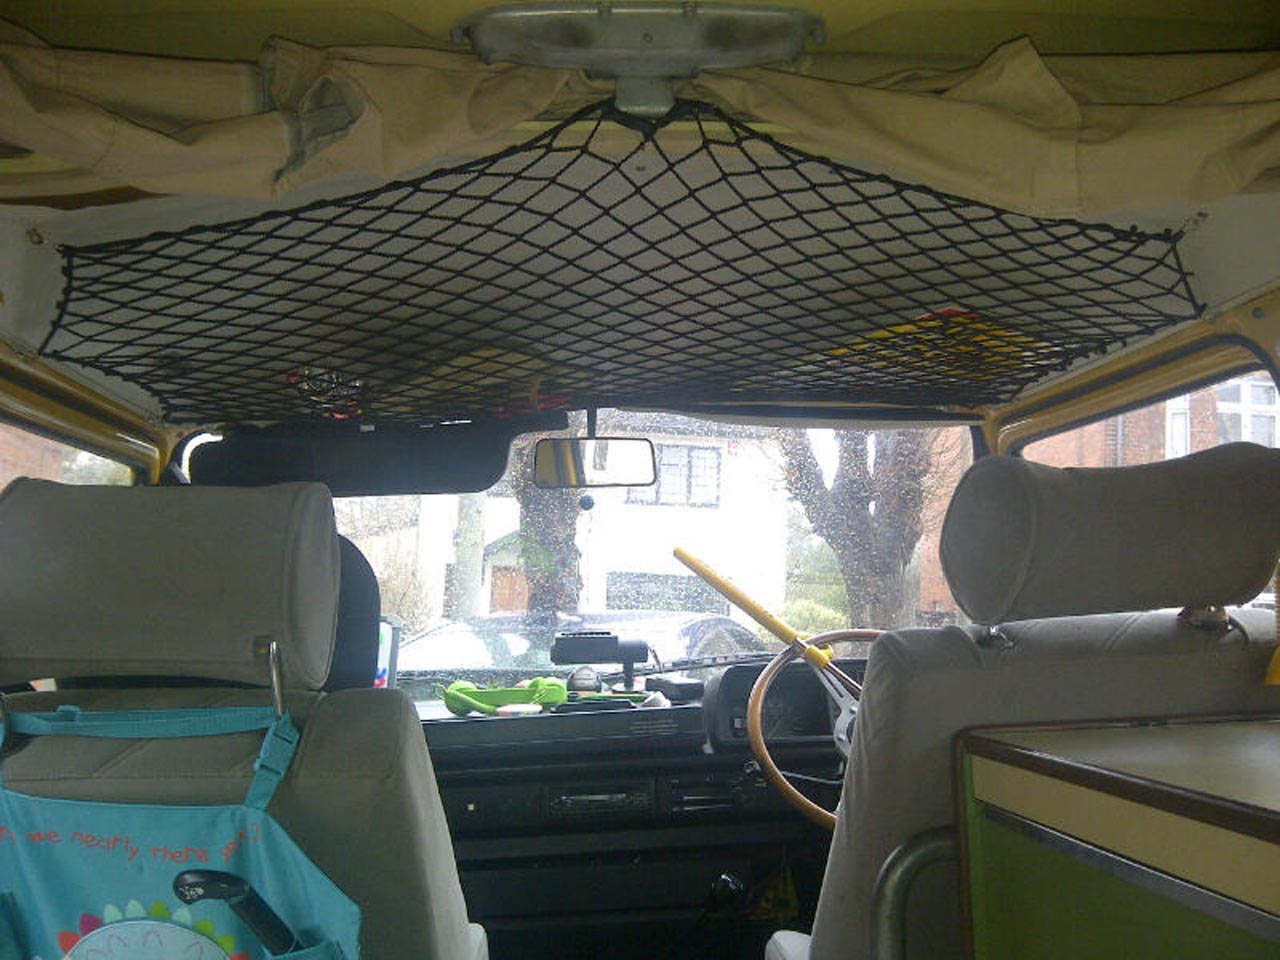 Black elastic net with bungee cord to create storage space on the roof of a camper van.